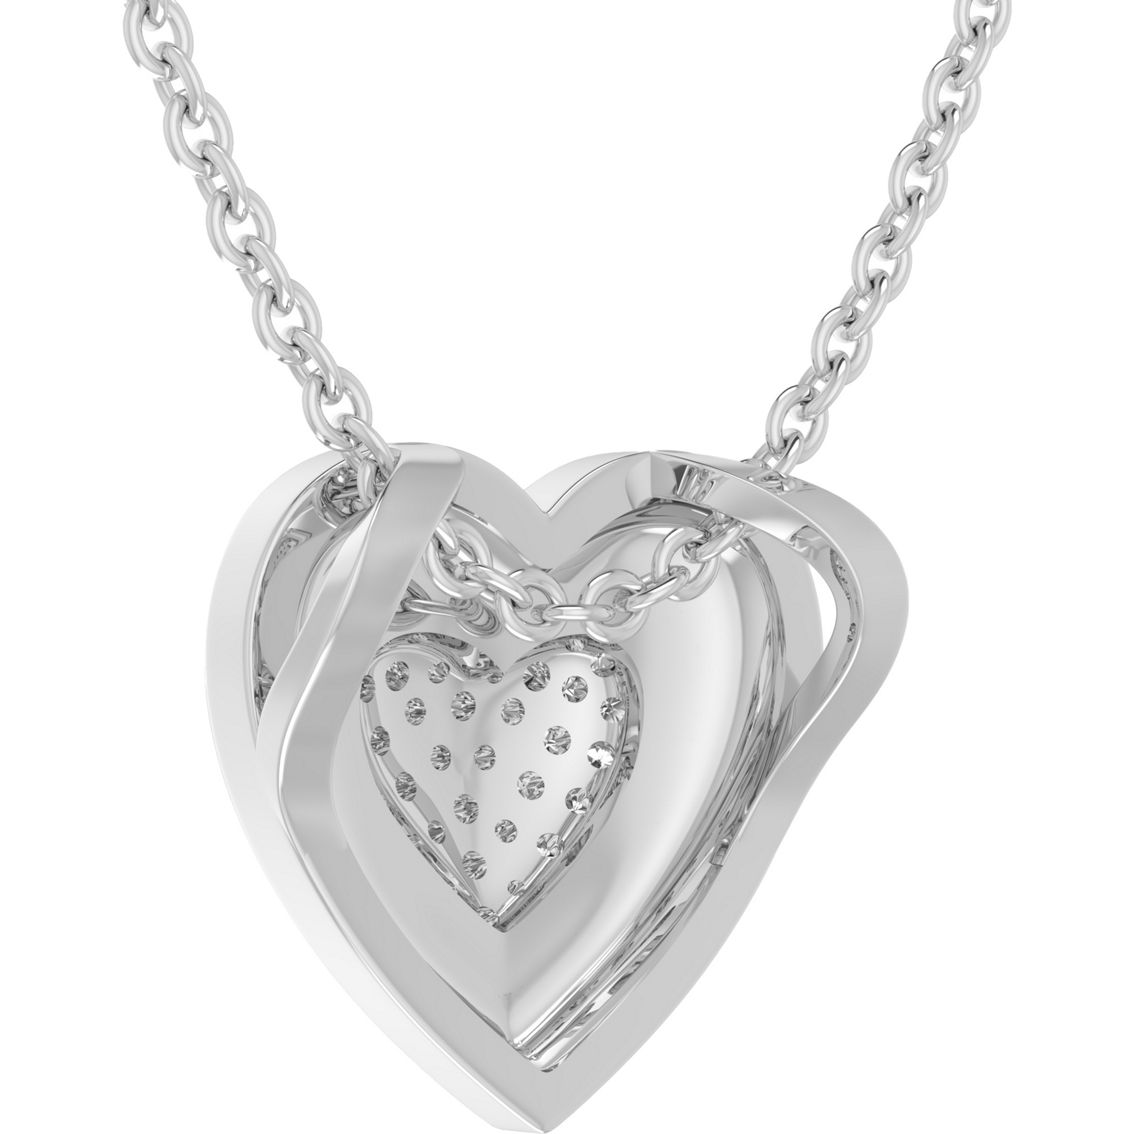 Sterling silver 1/5 CTW Diamond Heart Earrings and Pendant Set - Image 4 of 6